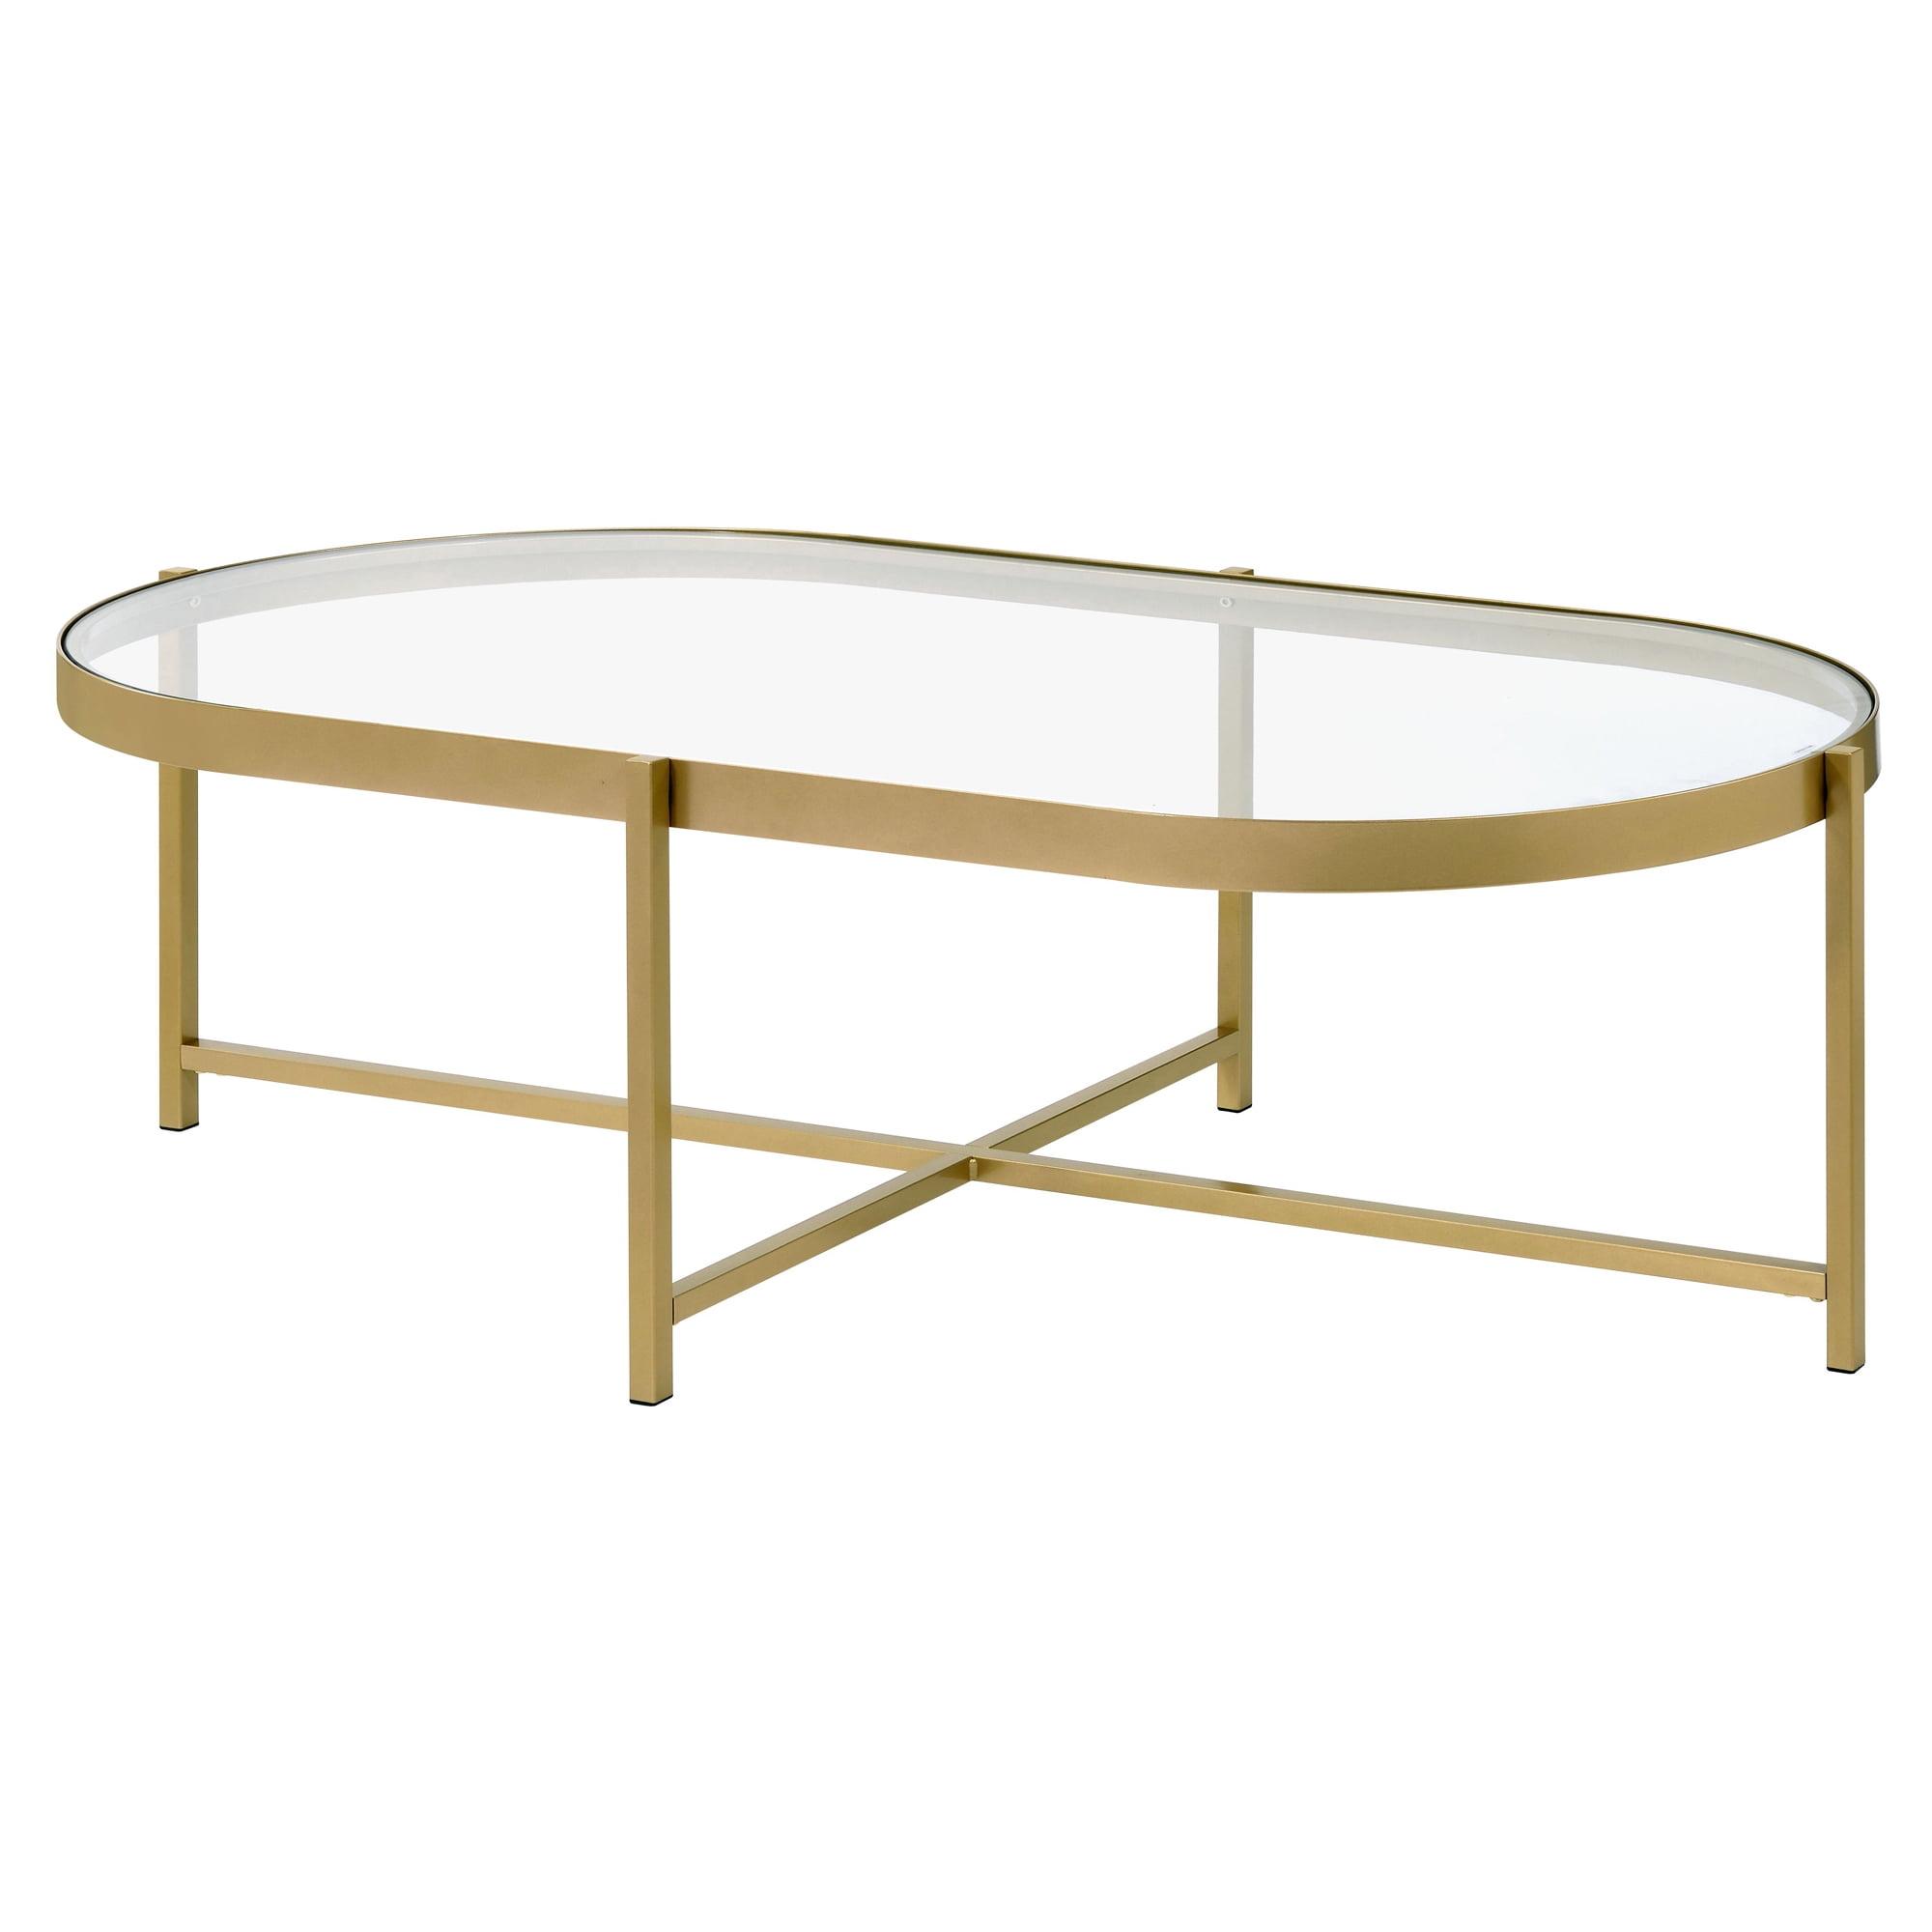 Elegant Oval Tempered Glass Outdoor Coffee Table with Gold Metal Base